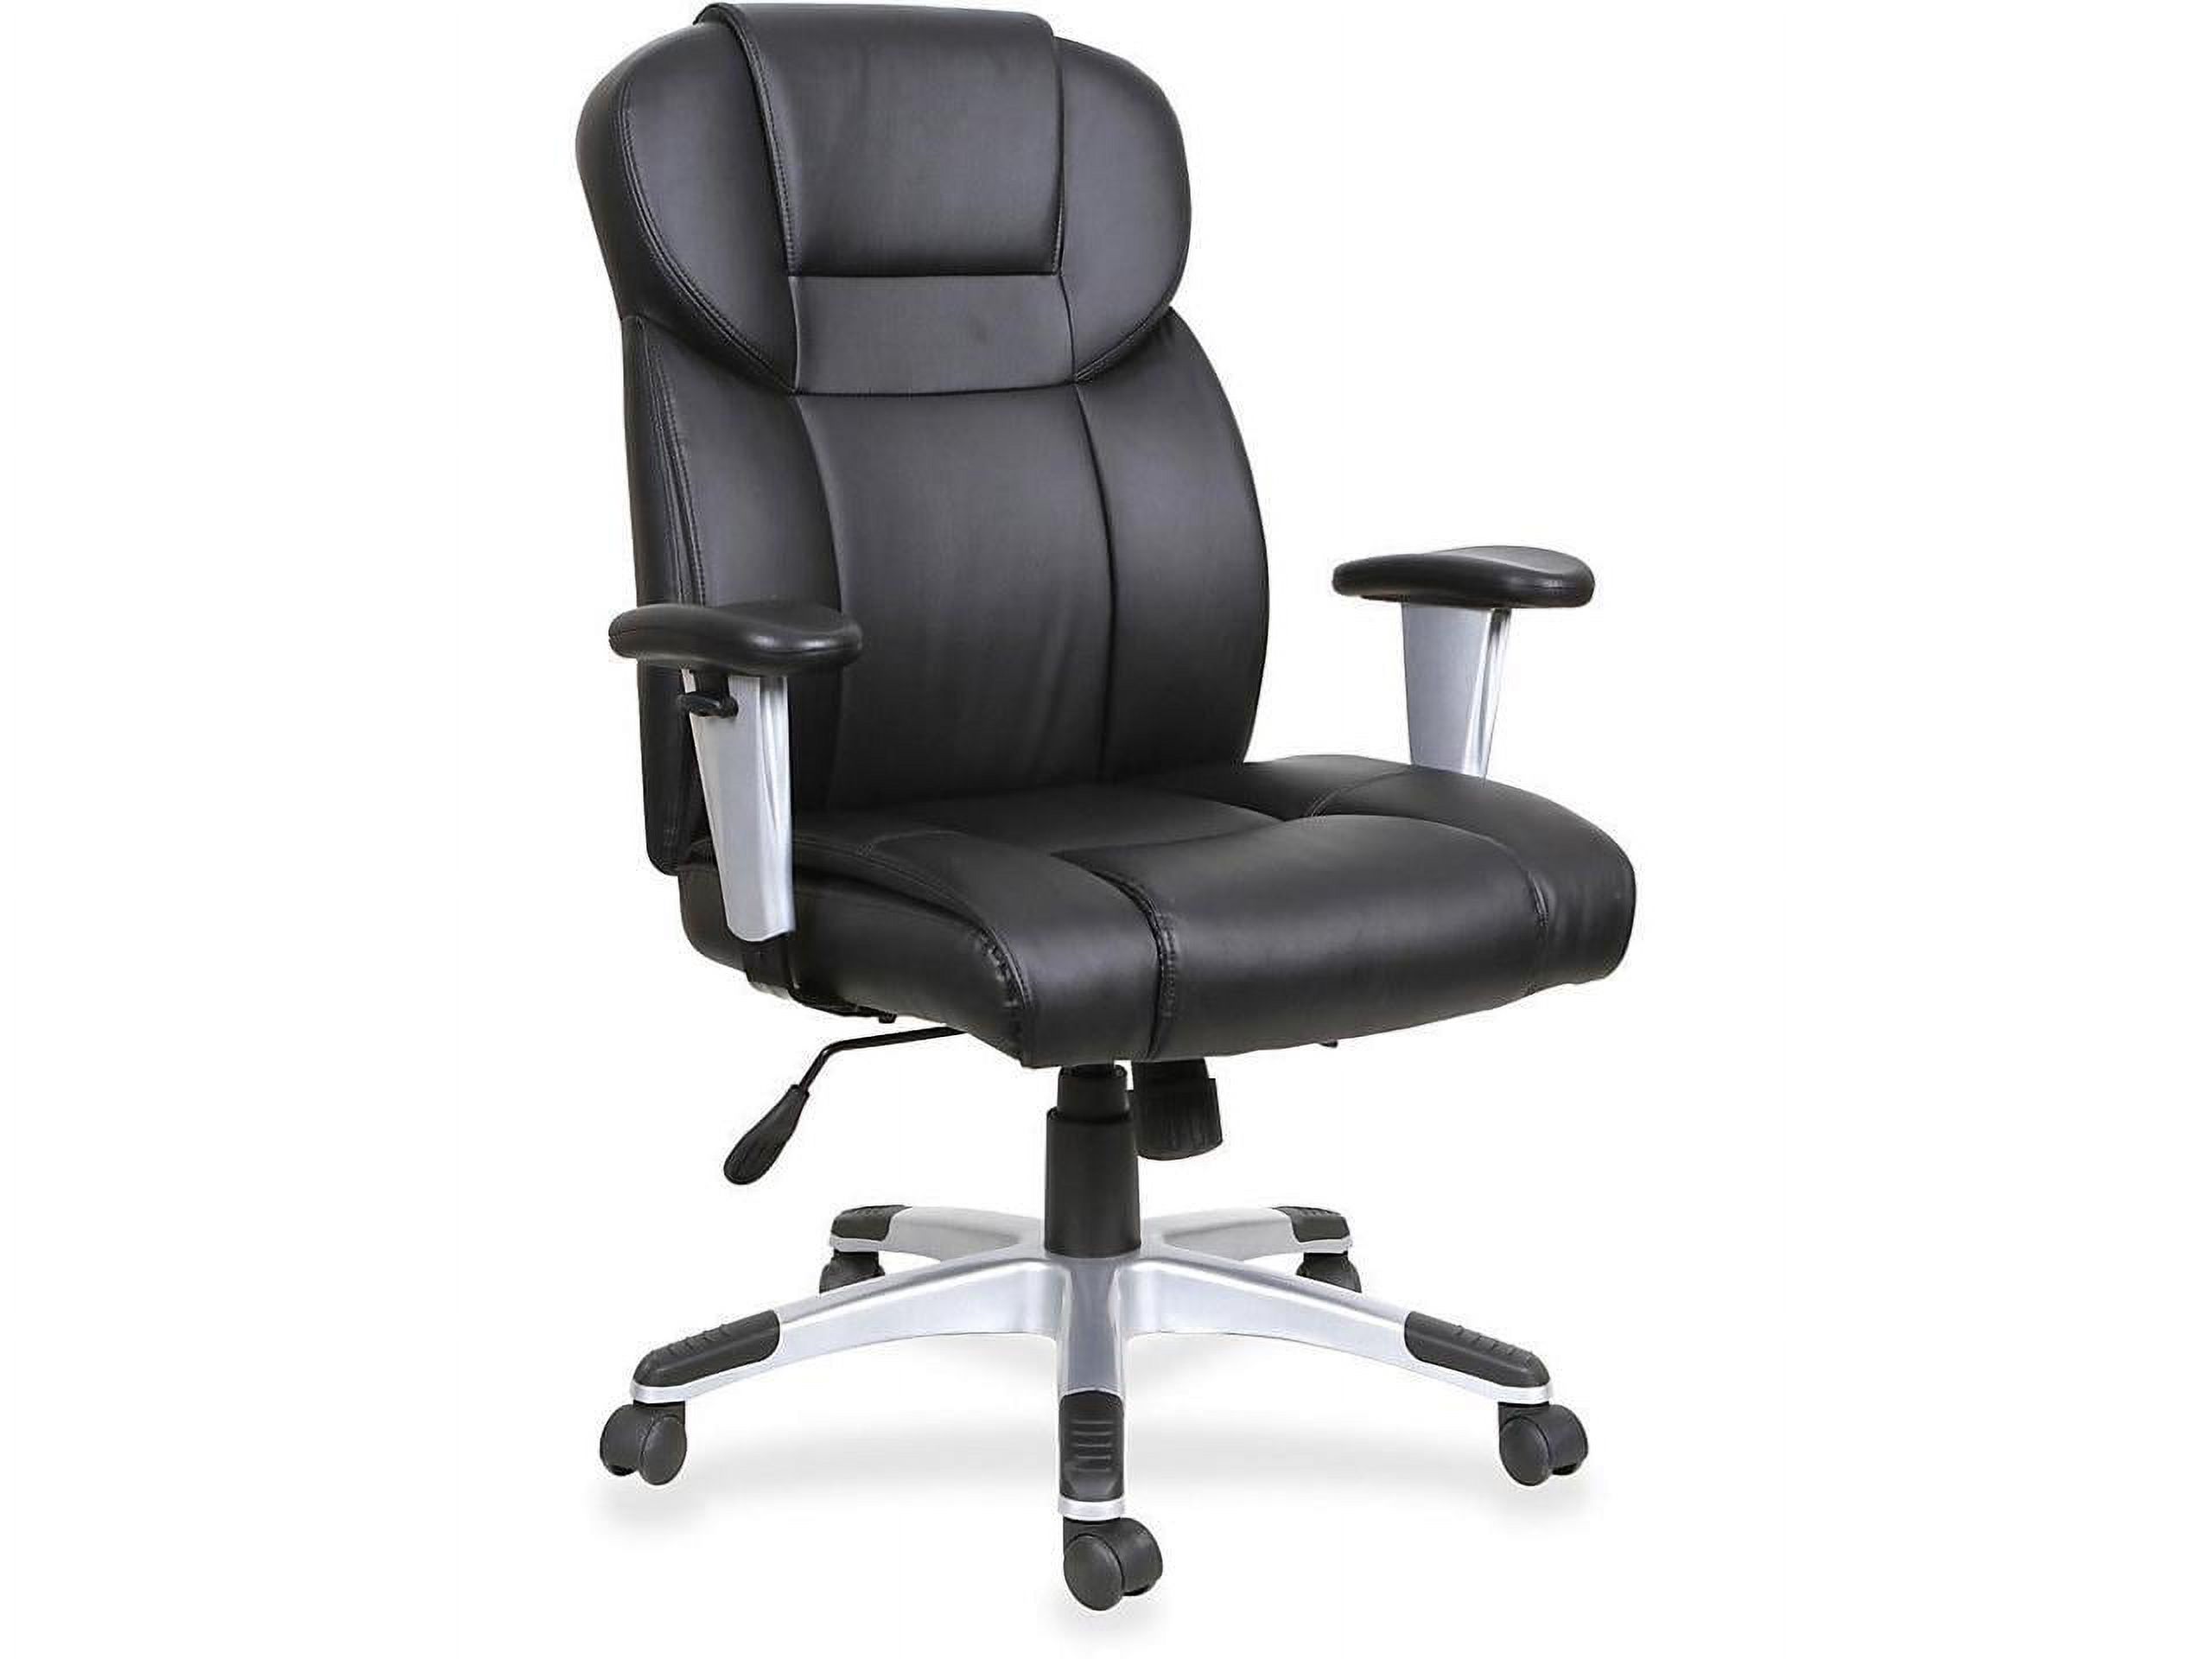 Lorell High-back Leather Executive Chair - Bonded Leather Seat - Bonded Leather Back - Black - 28.9" Width x 28.5" Depth - image 2 of 9